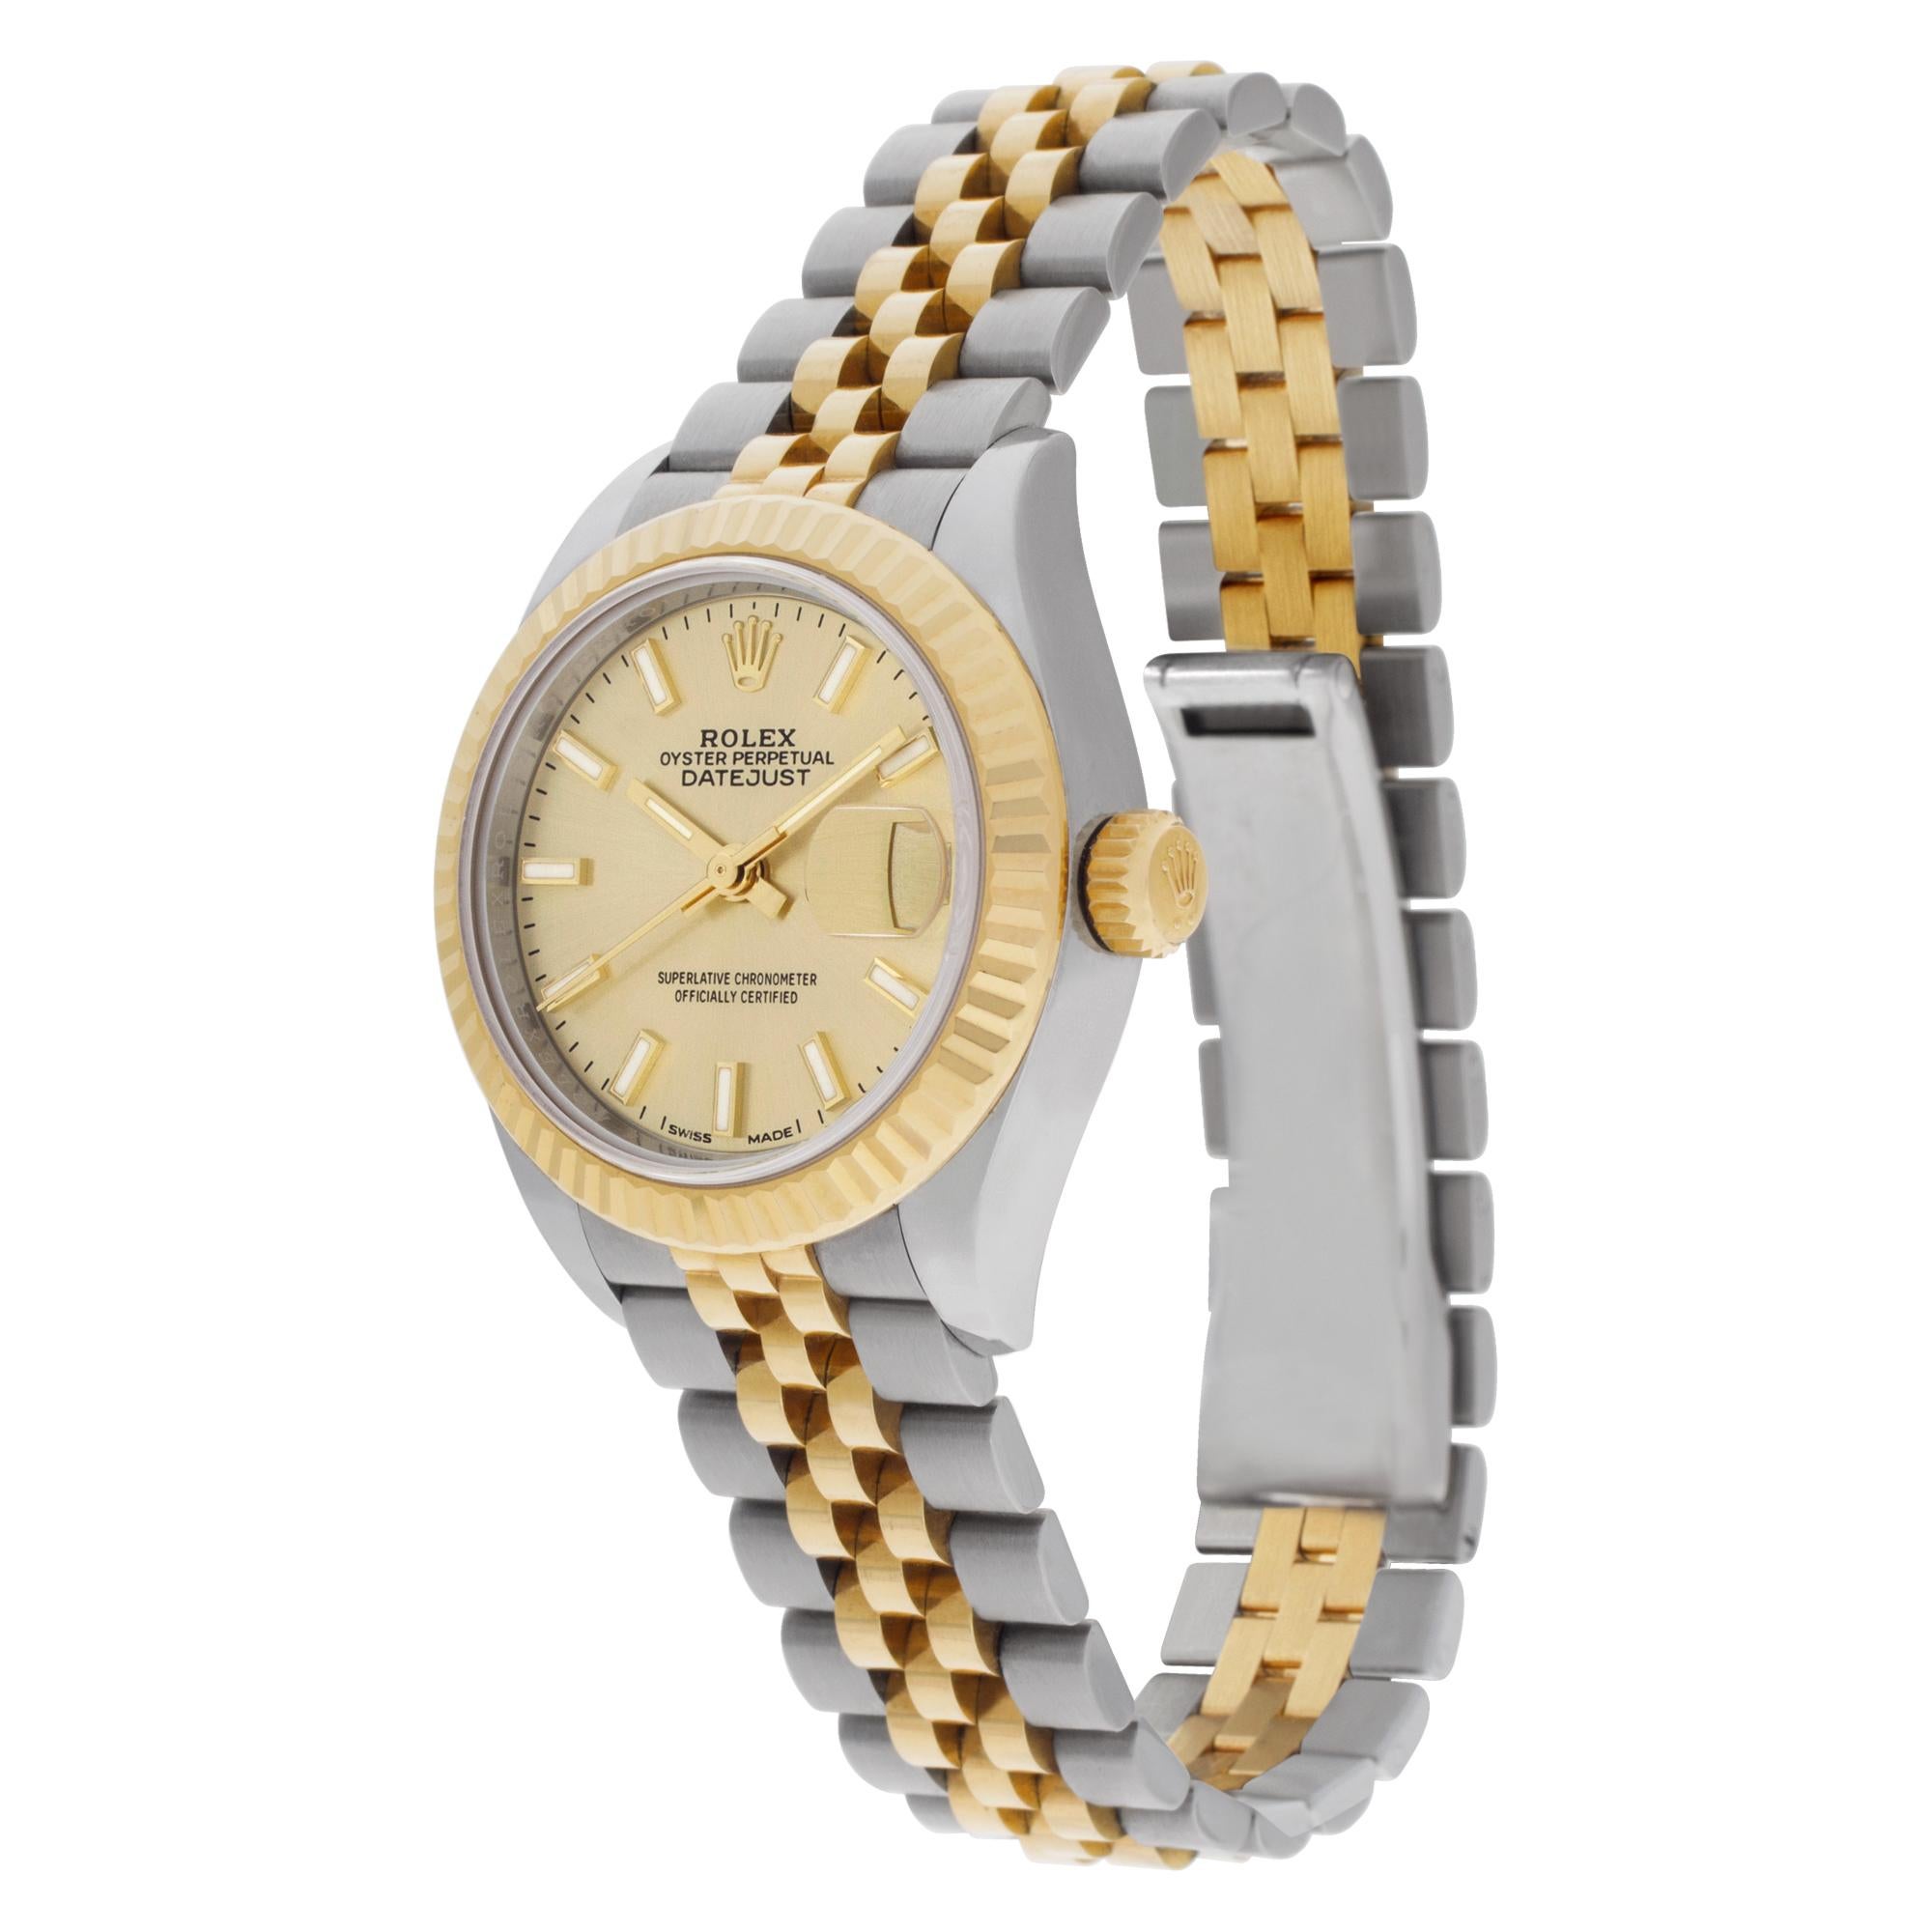 Rolex Datejust 28mm in 18k & stainless steel. Auto w/ sweep seconds and date. 28 mm case size. Circa 2020's. Ref 279173. Fine Pre-owned Rolex Watch.

Certified preowned Dress Rolex Datejust 279173 watch is made out of Gold and steel on a 18k &